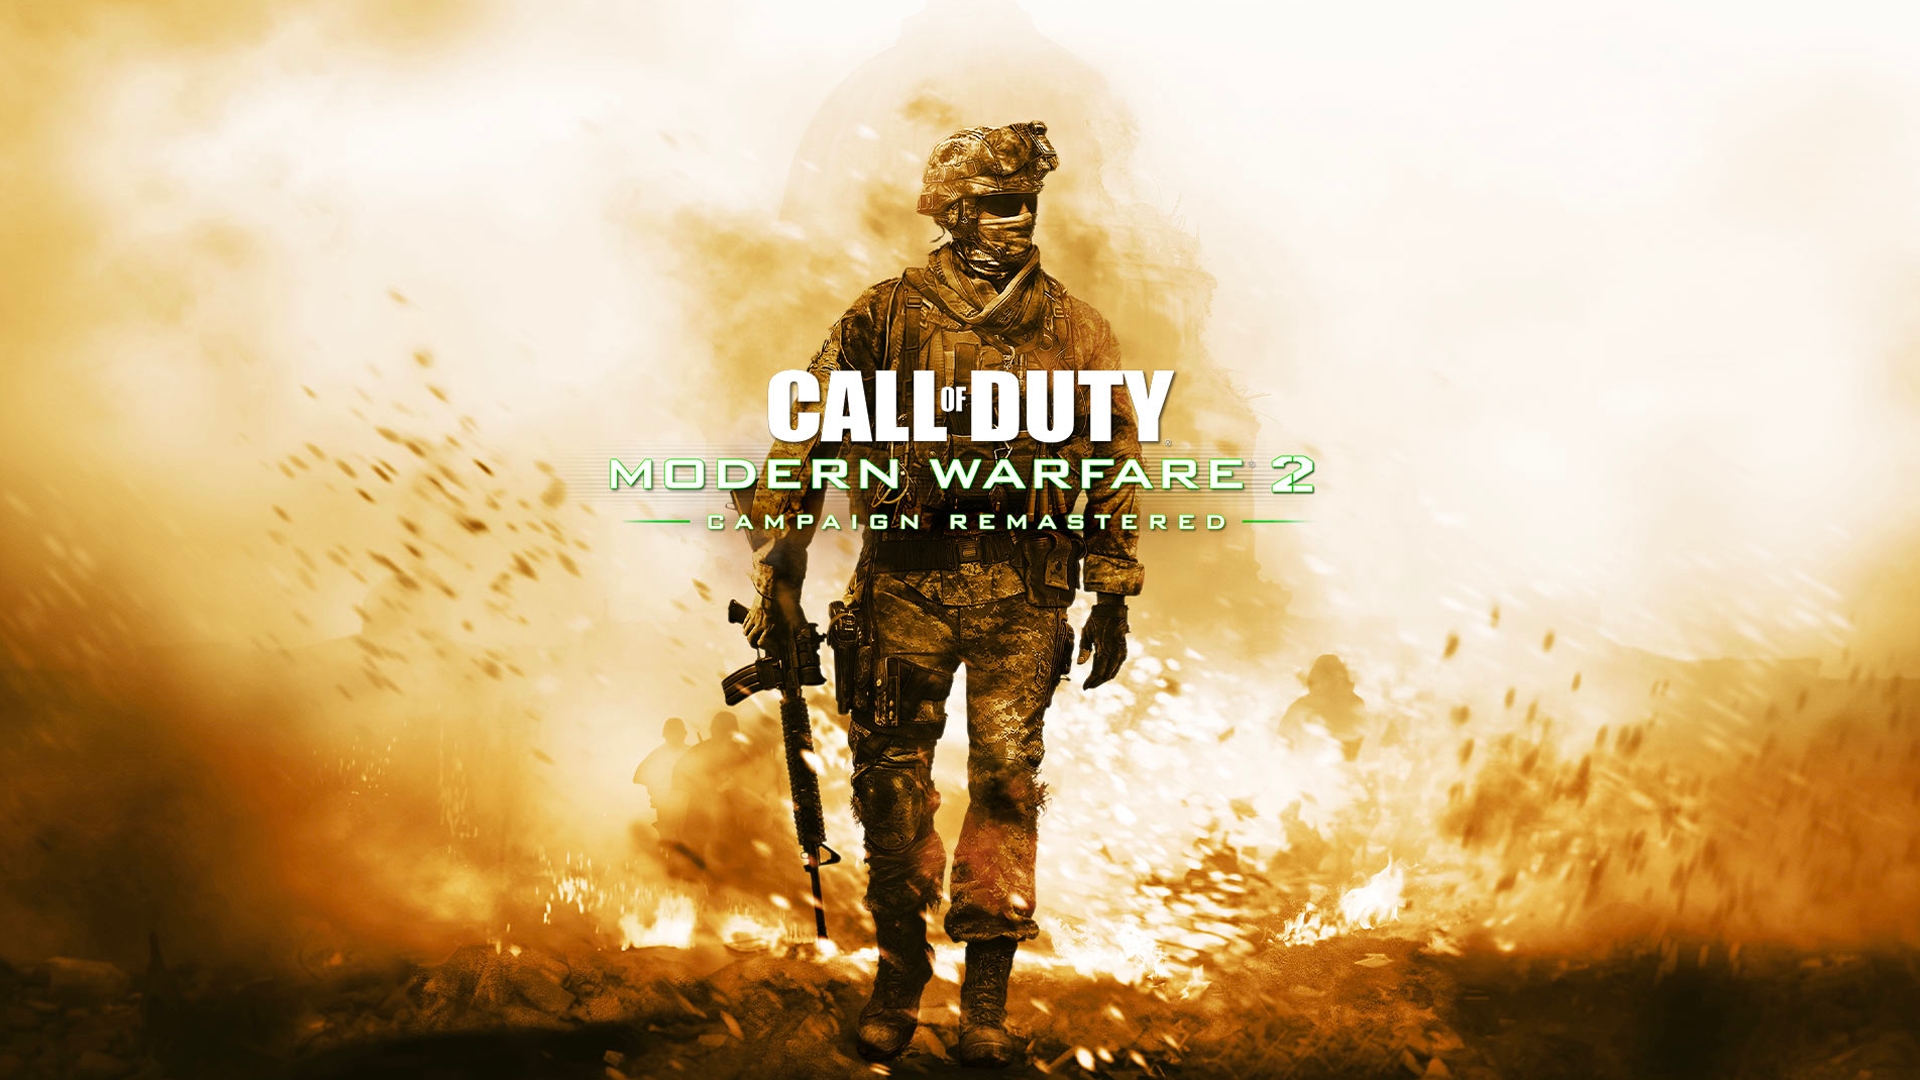 call-of-duty-modern-warfare-2-campaign-remastered-cover.jpg